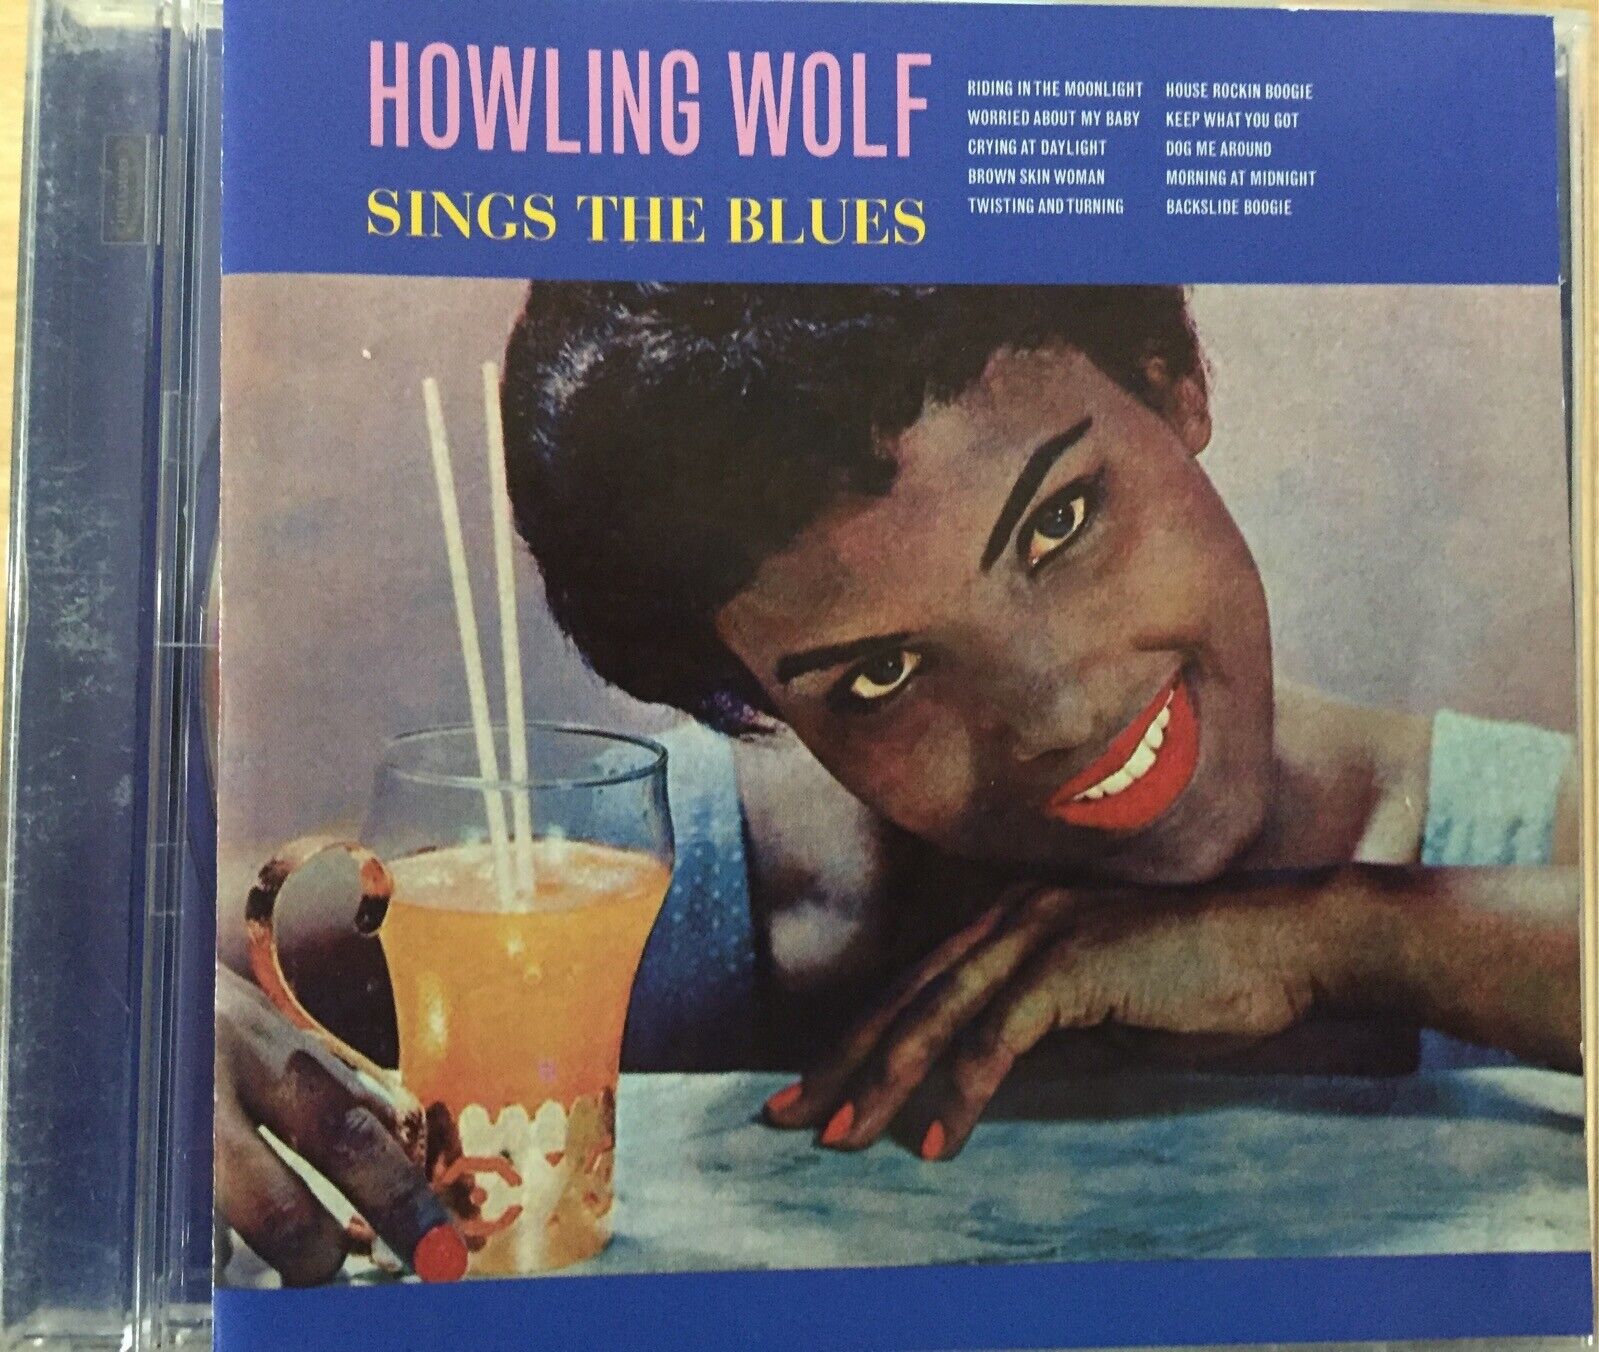 HOWLING WOLF - Sings The Blues CD 2017 Hallmark Excellent Cond